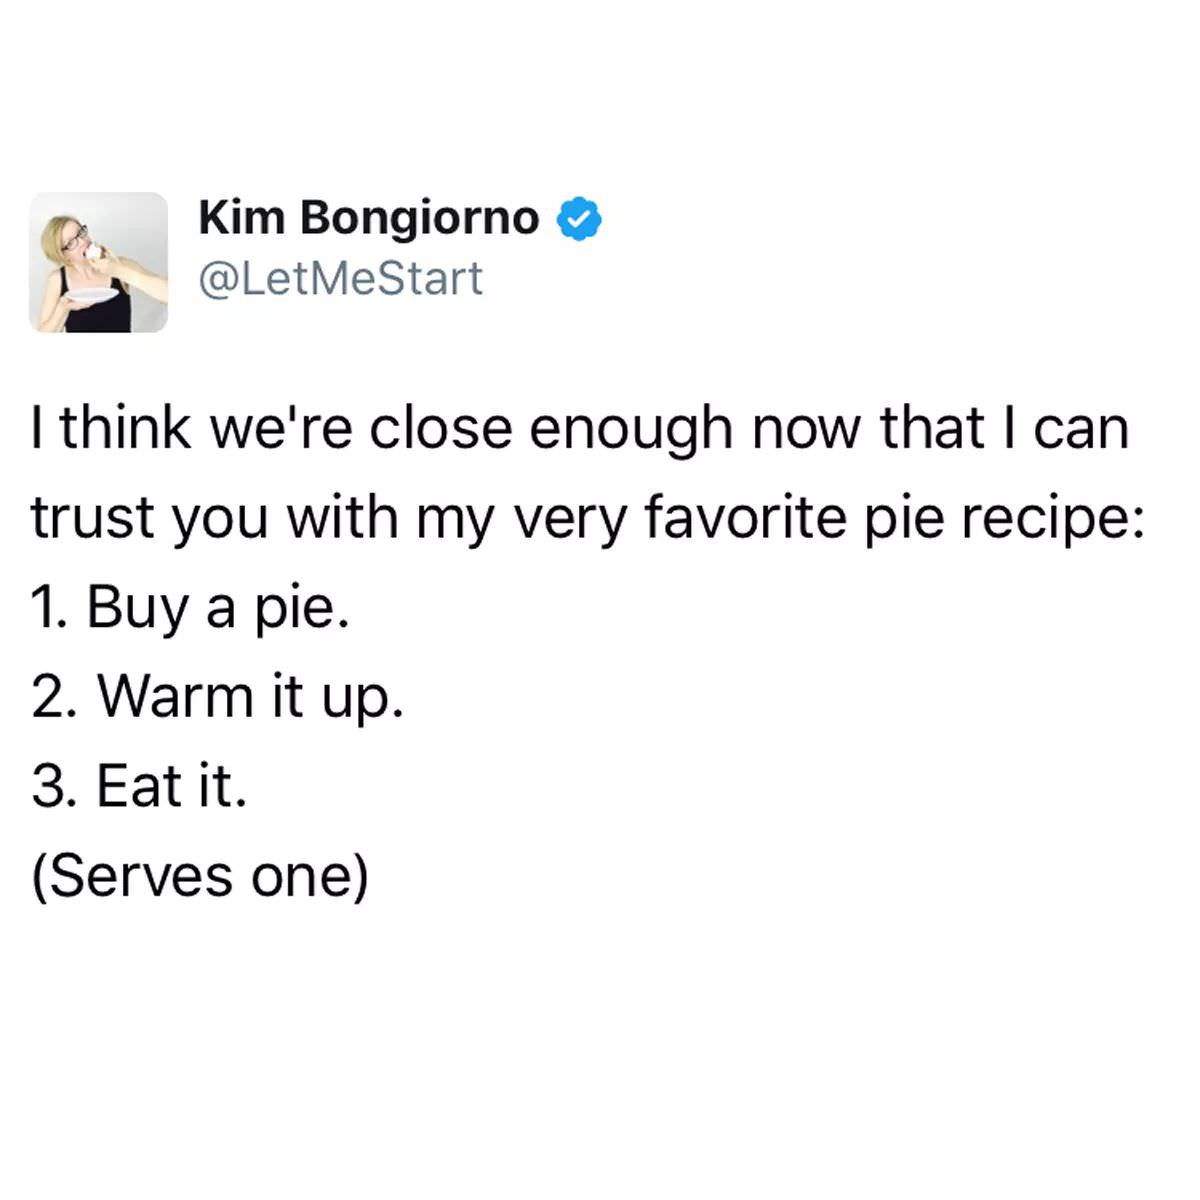 me IRL - Kim Bongiorno Me Start I think we're close enough now that I can trust you with my very favorite pie recipe 1. Buy a pie. 2. Warm it up. 3. Eat it. Serves one